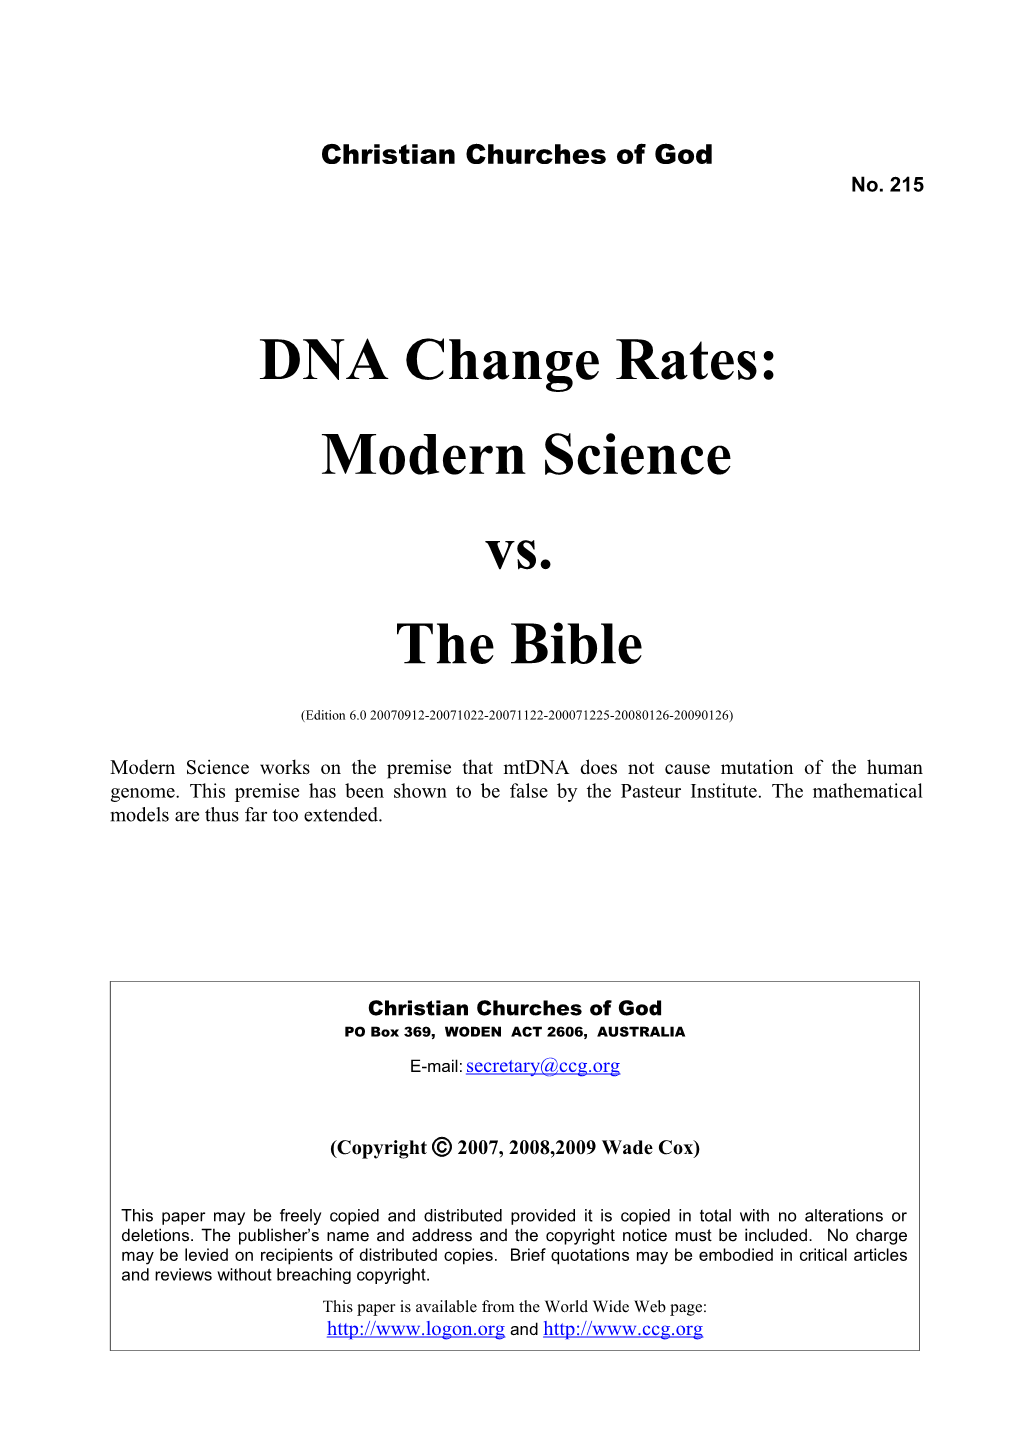 DNA Change Rates: Modern Science Vs. the Bible (No. 215)